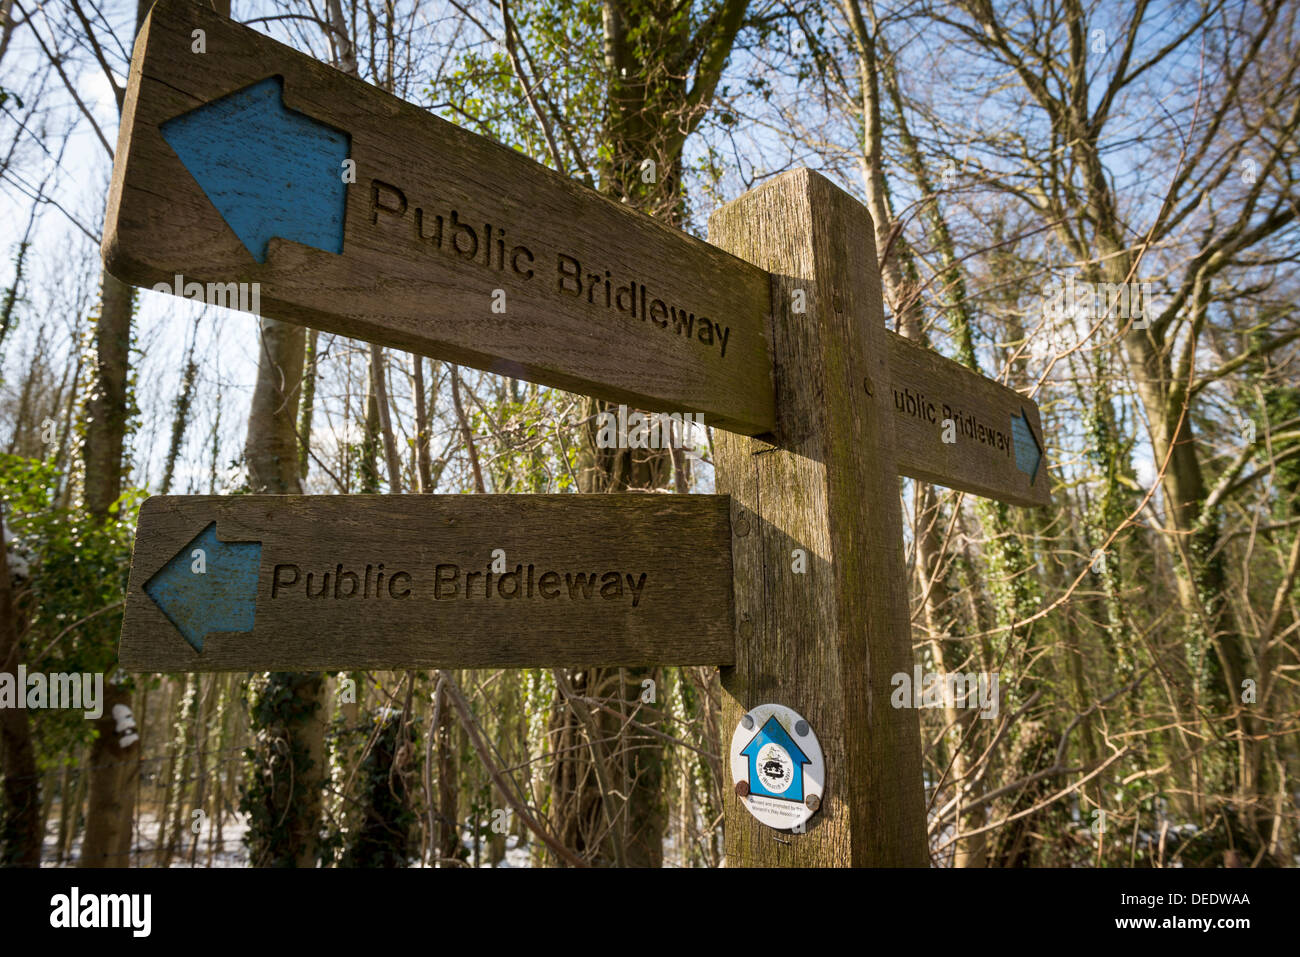 Public Bridle Way & Monarch's Way signpost near Chicester, West Sussex,UK Stock Photo